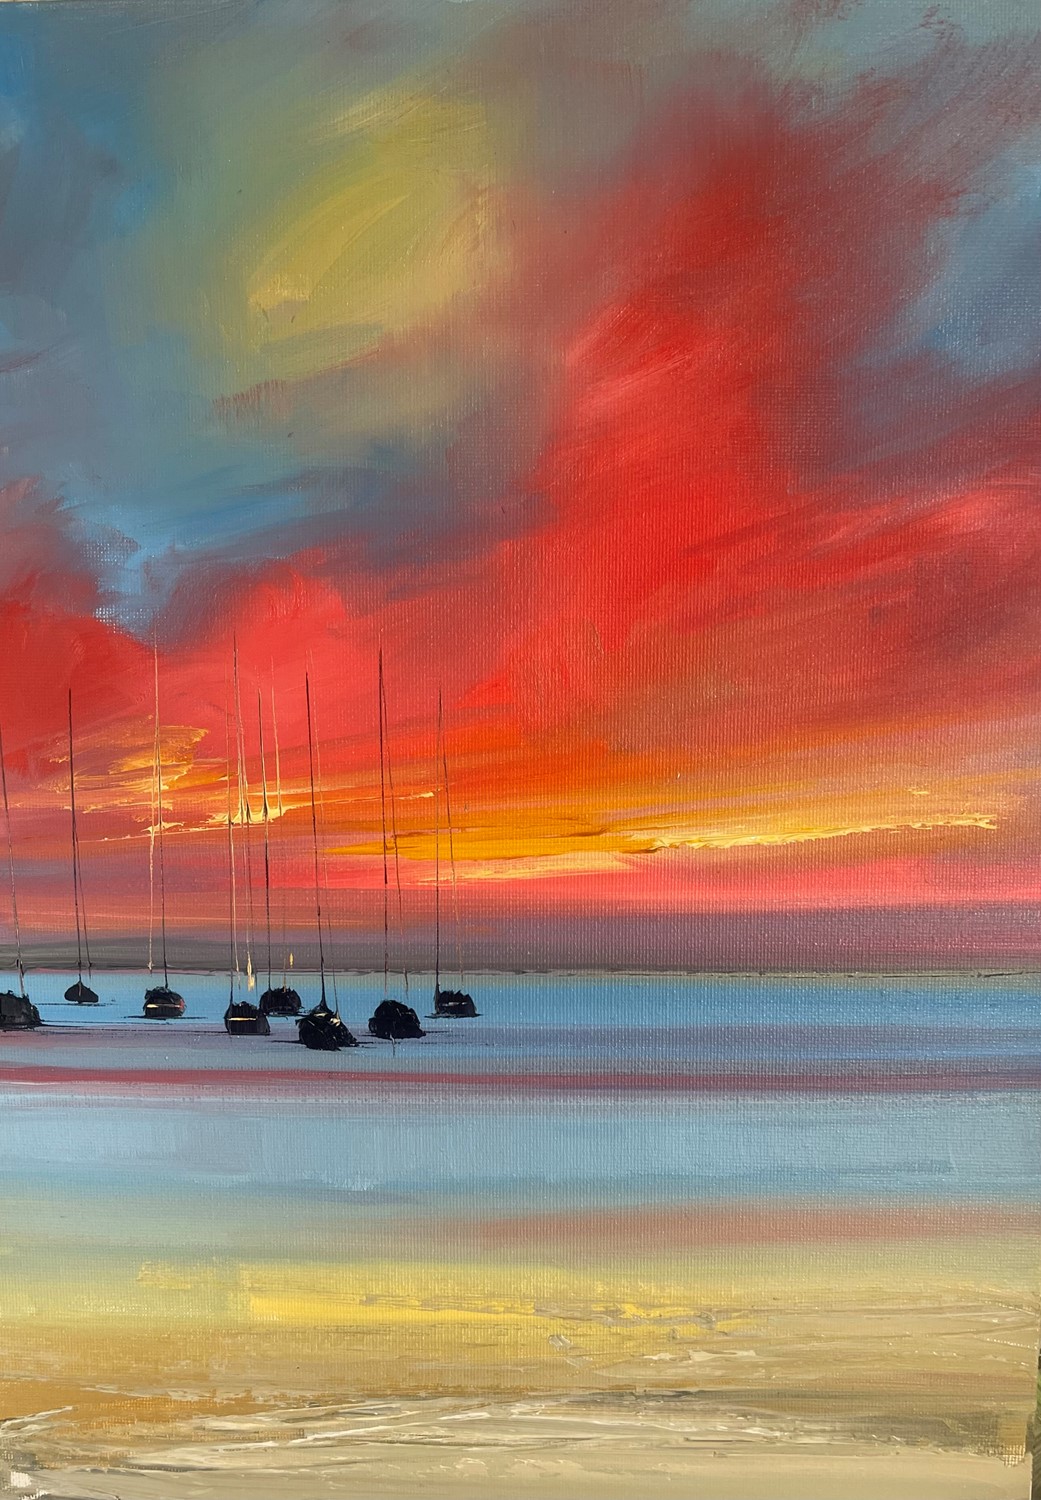 'Eight docked at sunset ' by artist Rosanne Barr